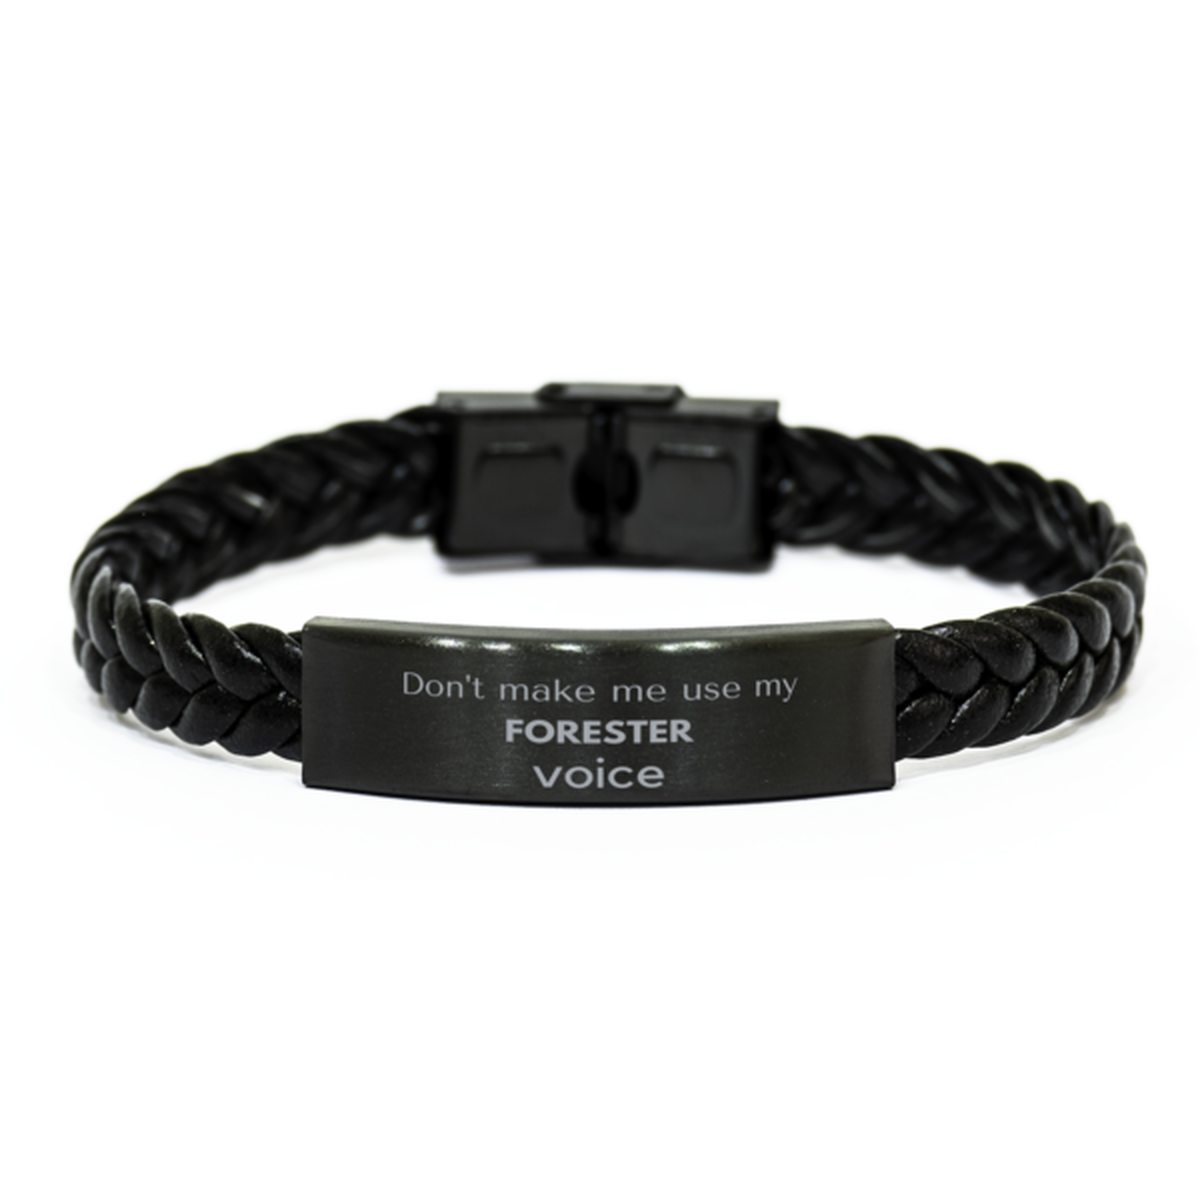 Don't make me use my Forester voice, Sarcasm Forester Gifts, Christmas Forester Braided Leather Bracelet Birthday Unique Gifts For Forester Coworkers, Men, Women, Colleague, Friends